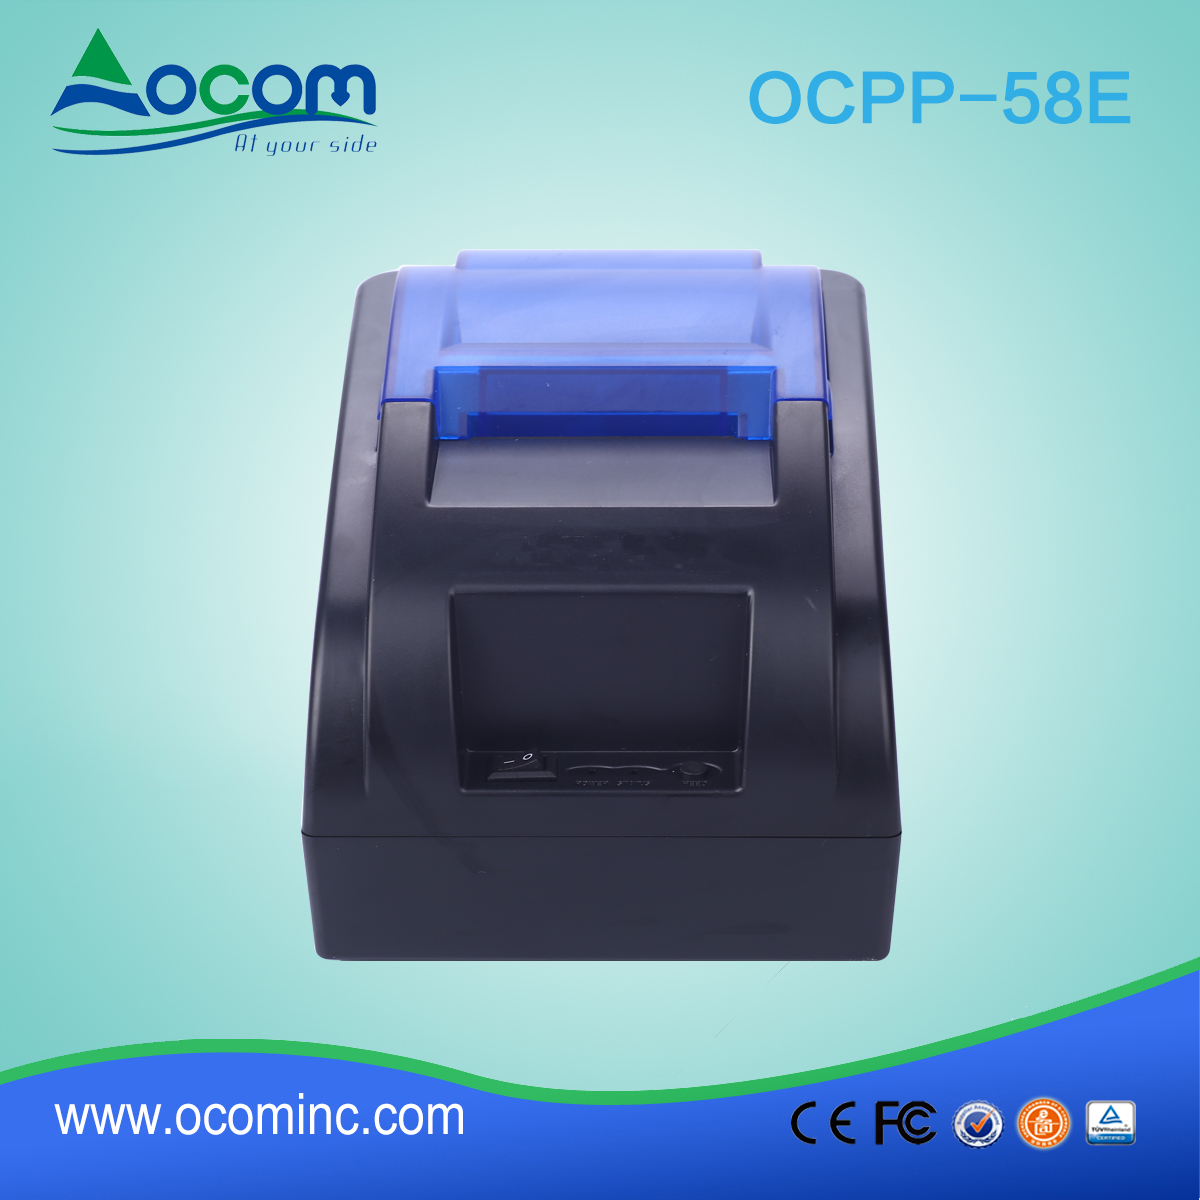 OCPP-58E 58mm thermal receipt printer with built-in power adaptor